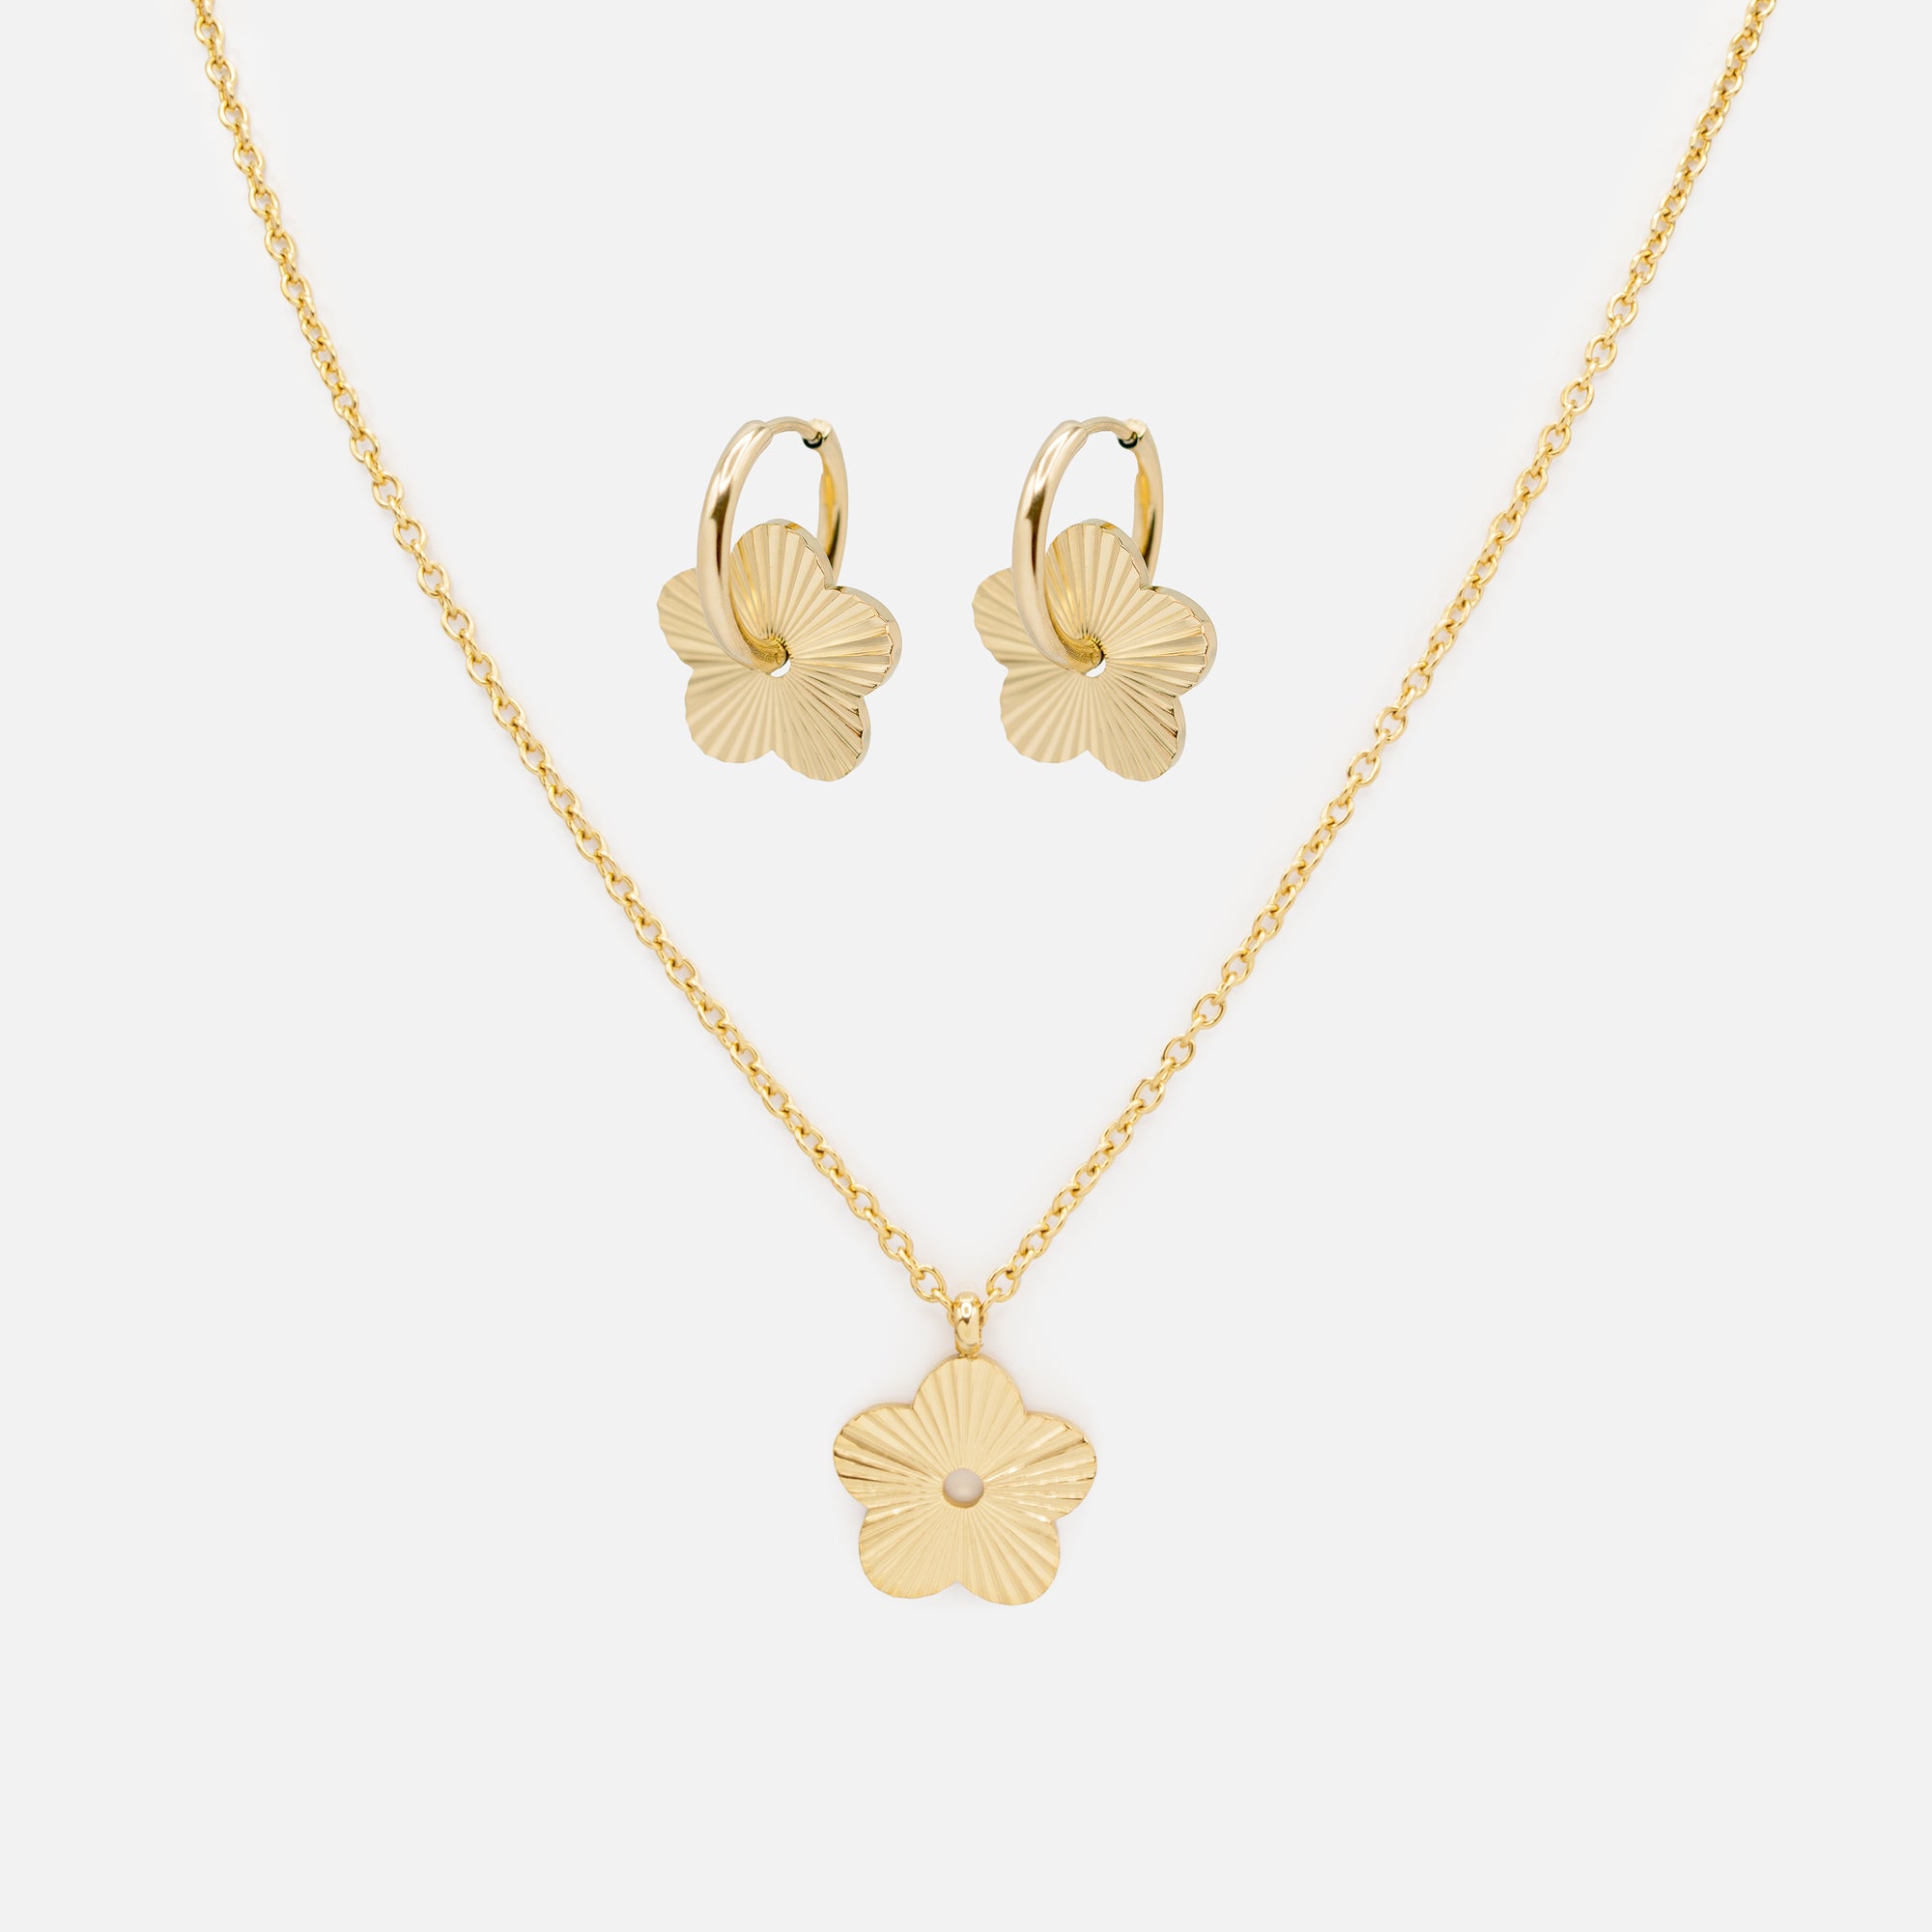 Removable Gold Textured Flowers Necklace and Earrings Set in Stainless Steel